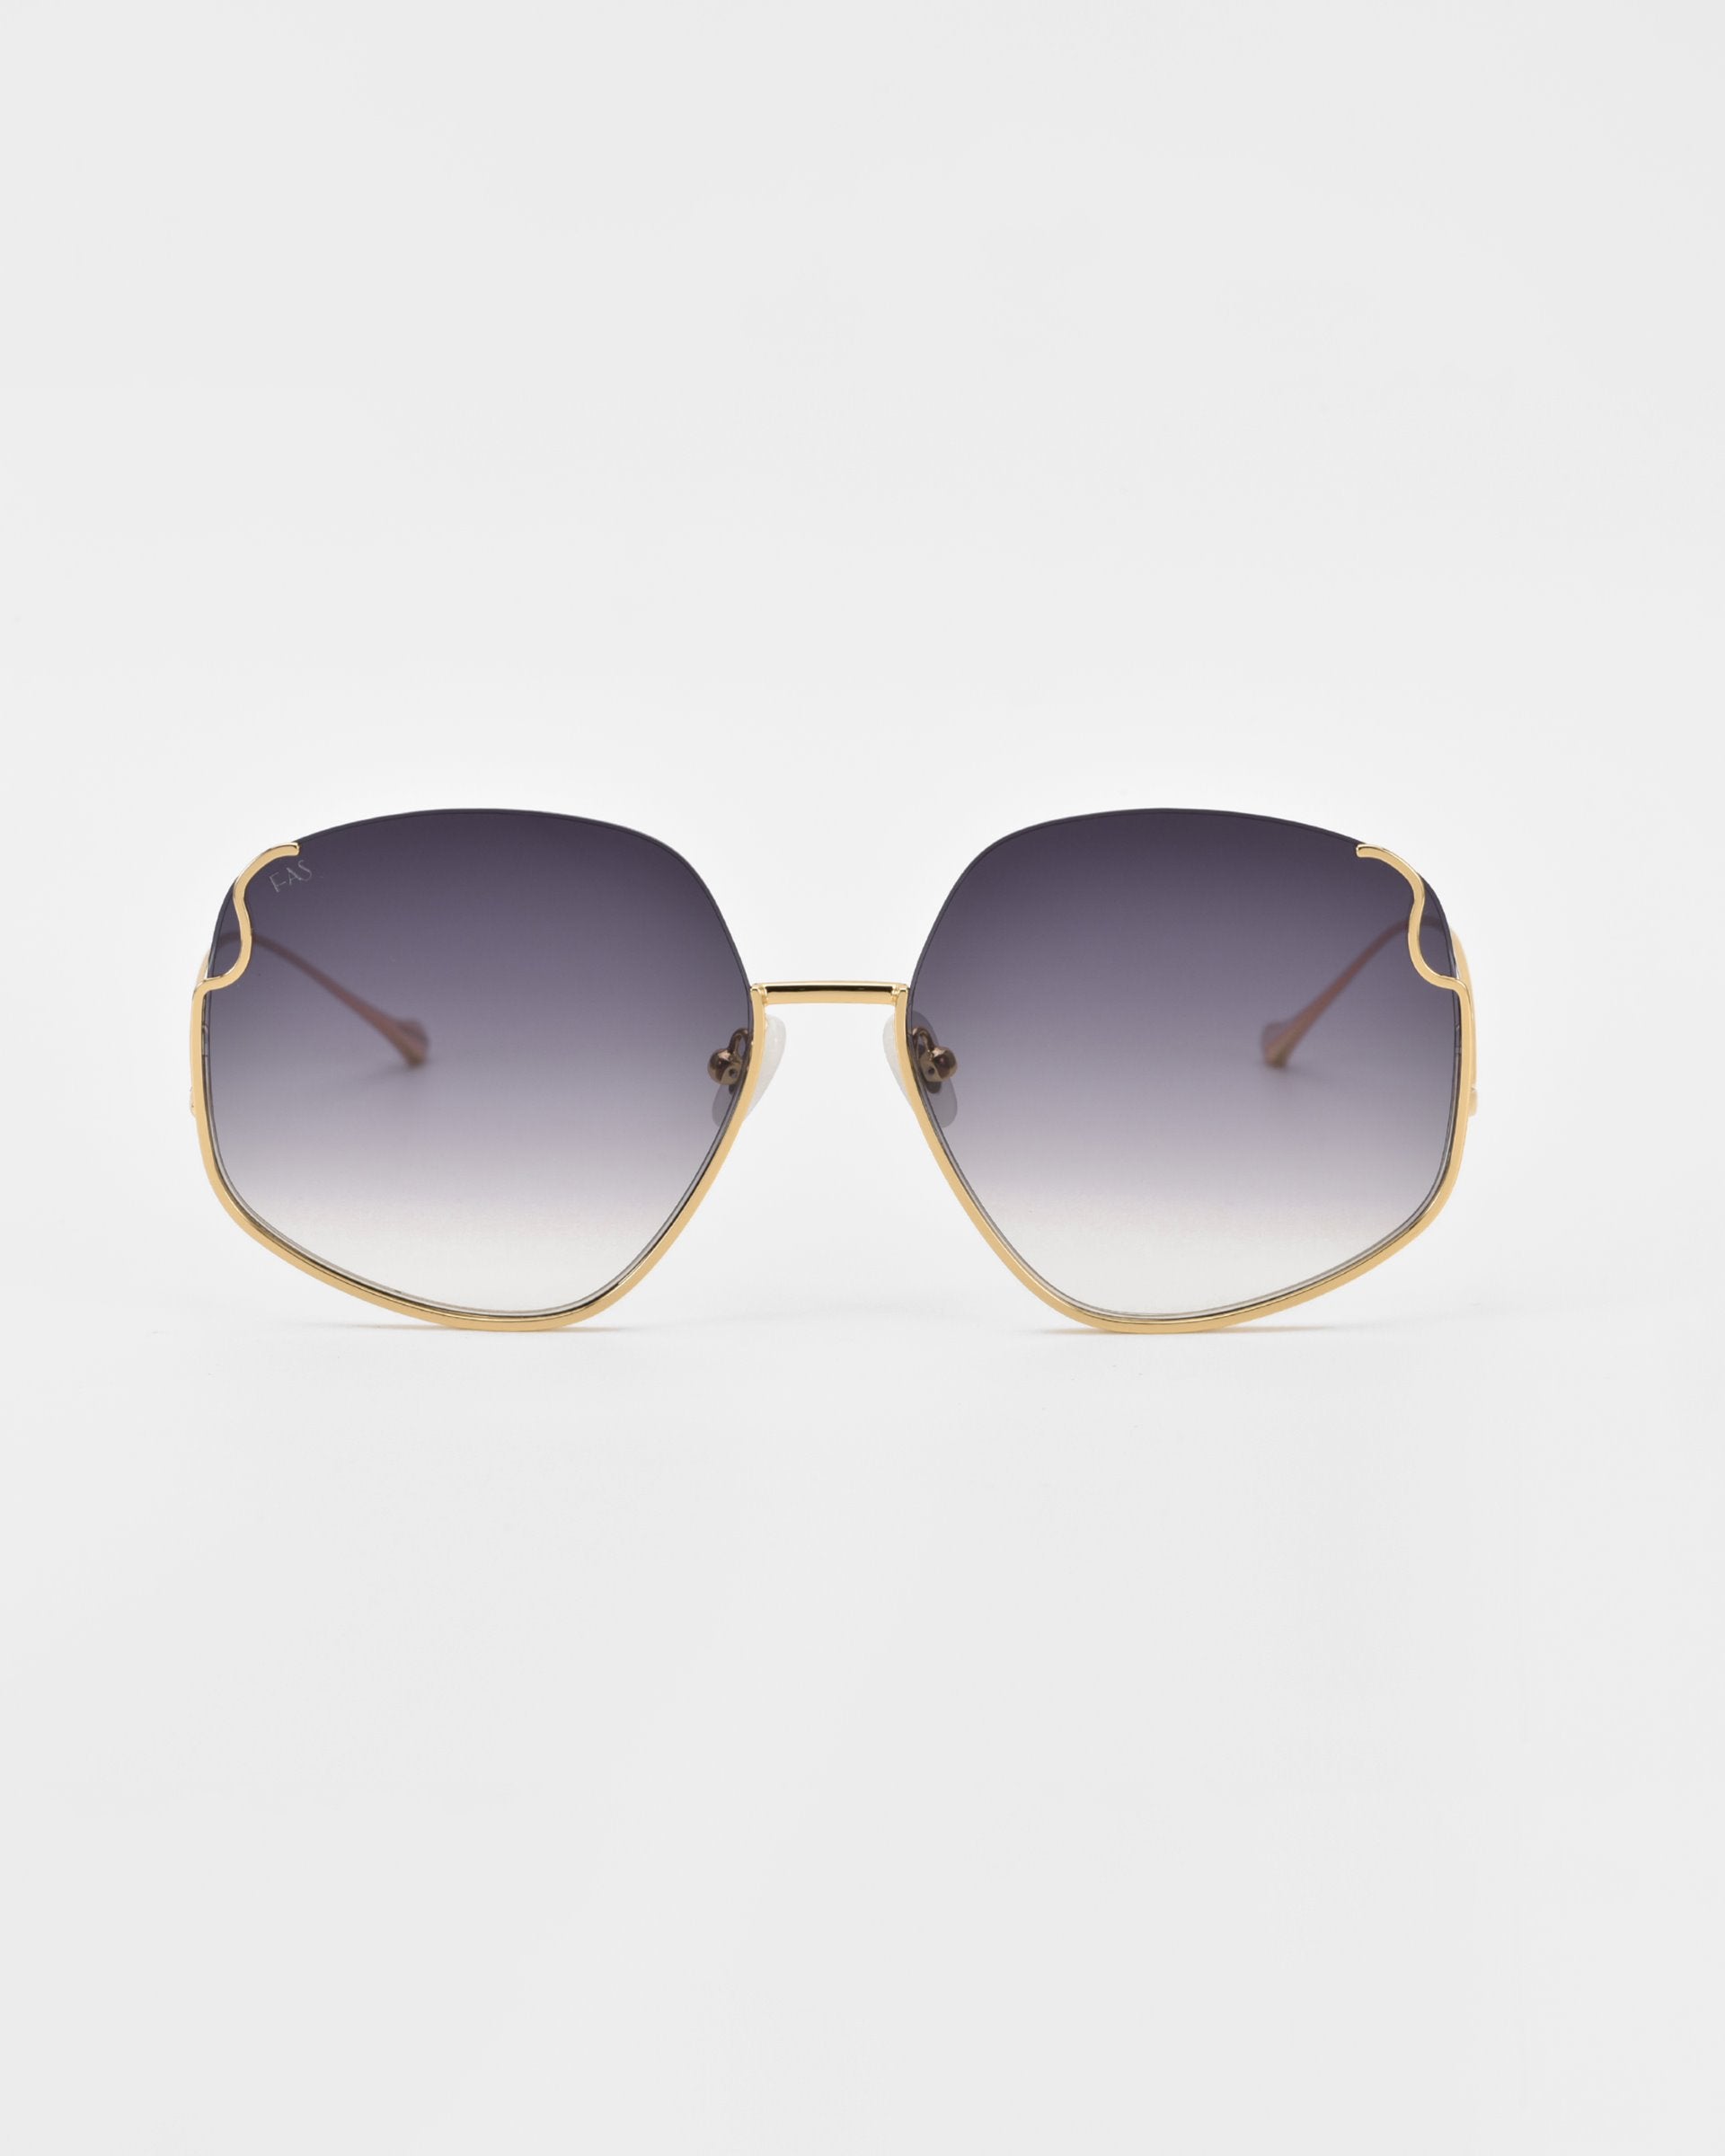 A pair of luxurious For Art's Sake® Drape sunglasses with gold frames and large, slightly hexagonal lenses. The lenses have a gradient tint, transitioning from dark at the top to lighter at the bottom. The frame features intricate metal detailing on thin arms and a minimalistic design. The background is plain white.